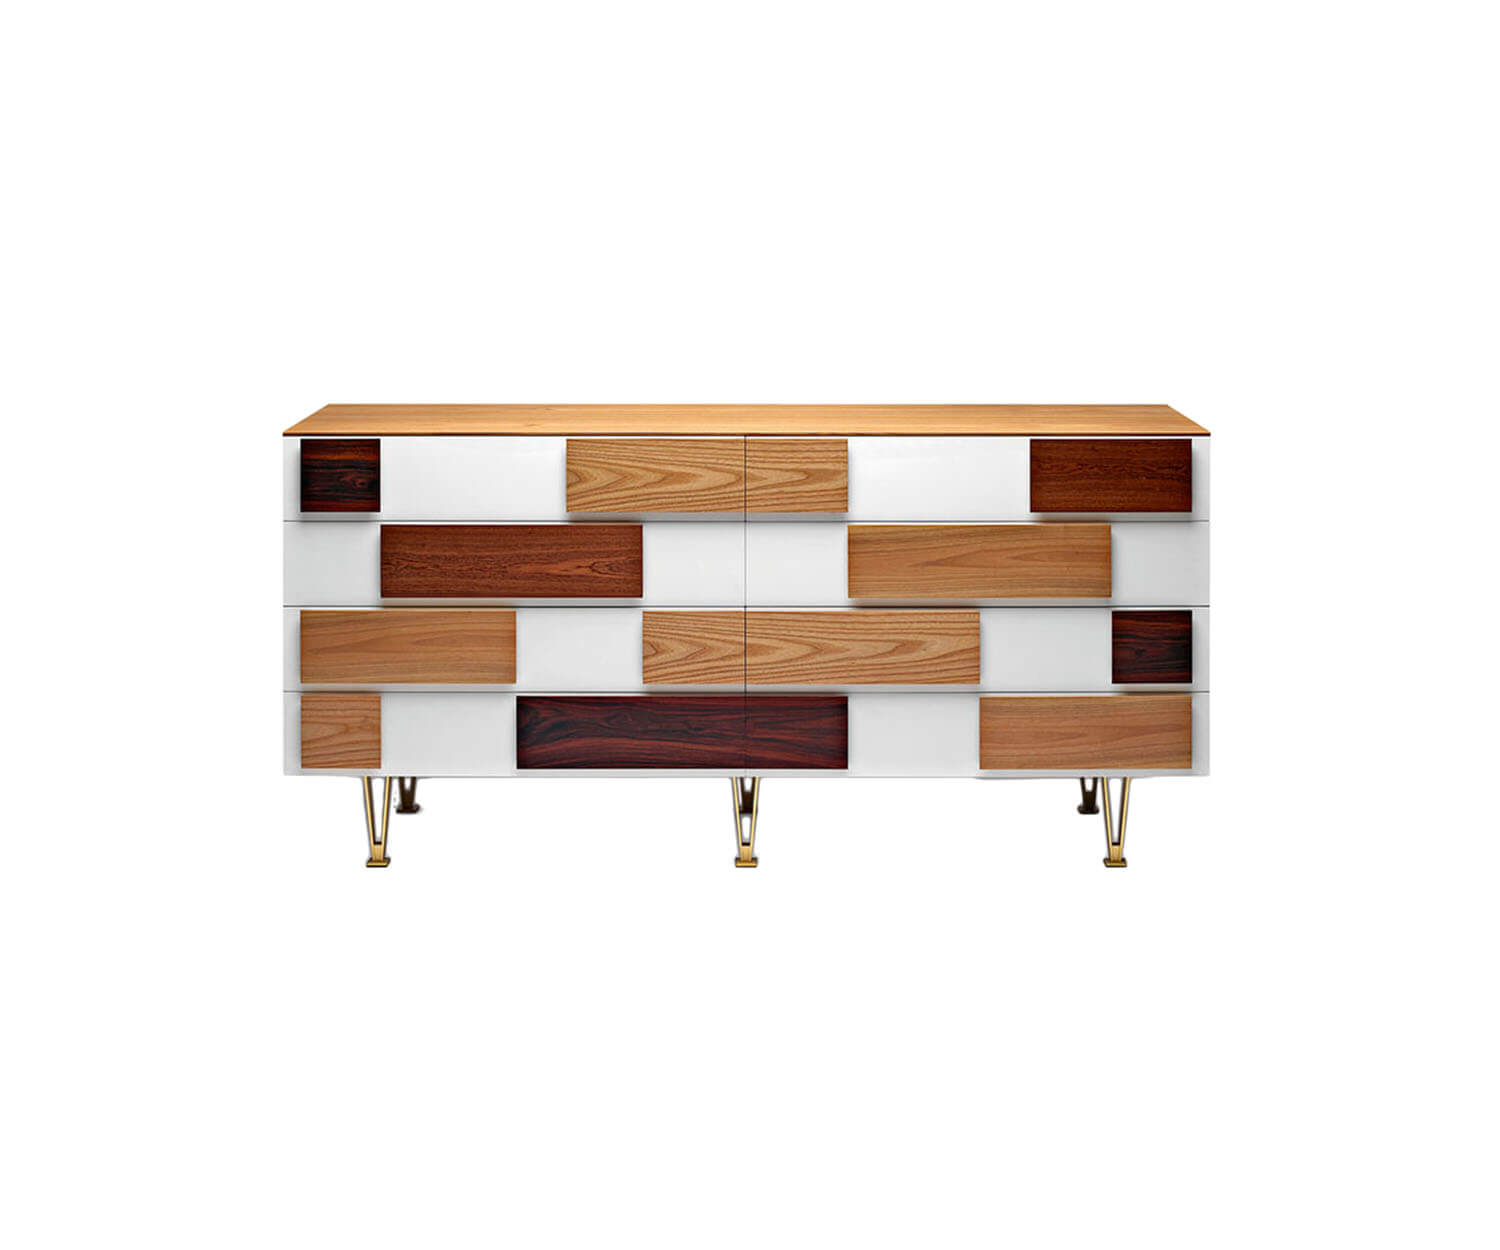 Molteni&C, Gio Ponti D.655.1 - D.655.2 Chests of Drawers